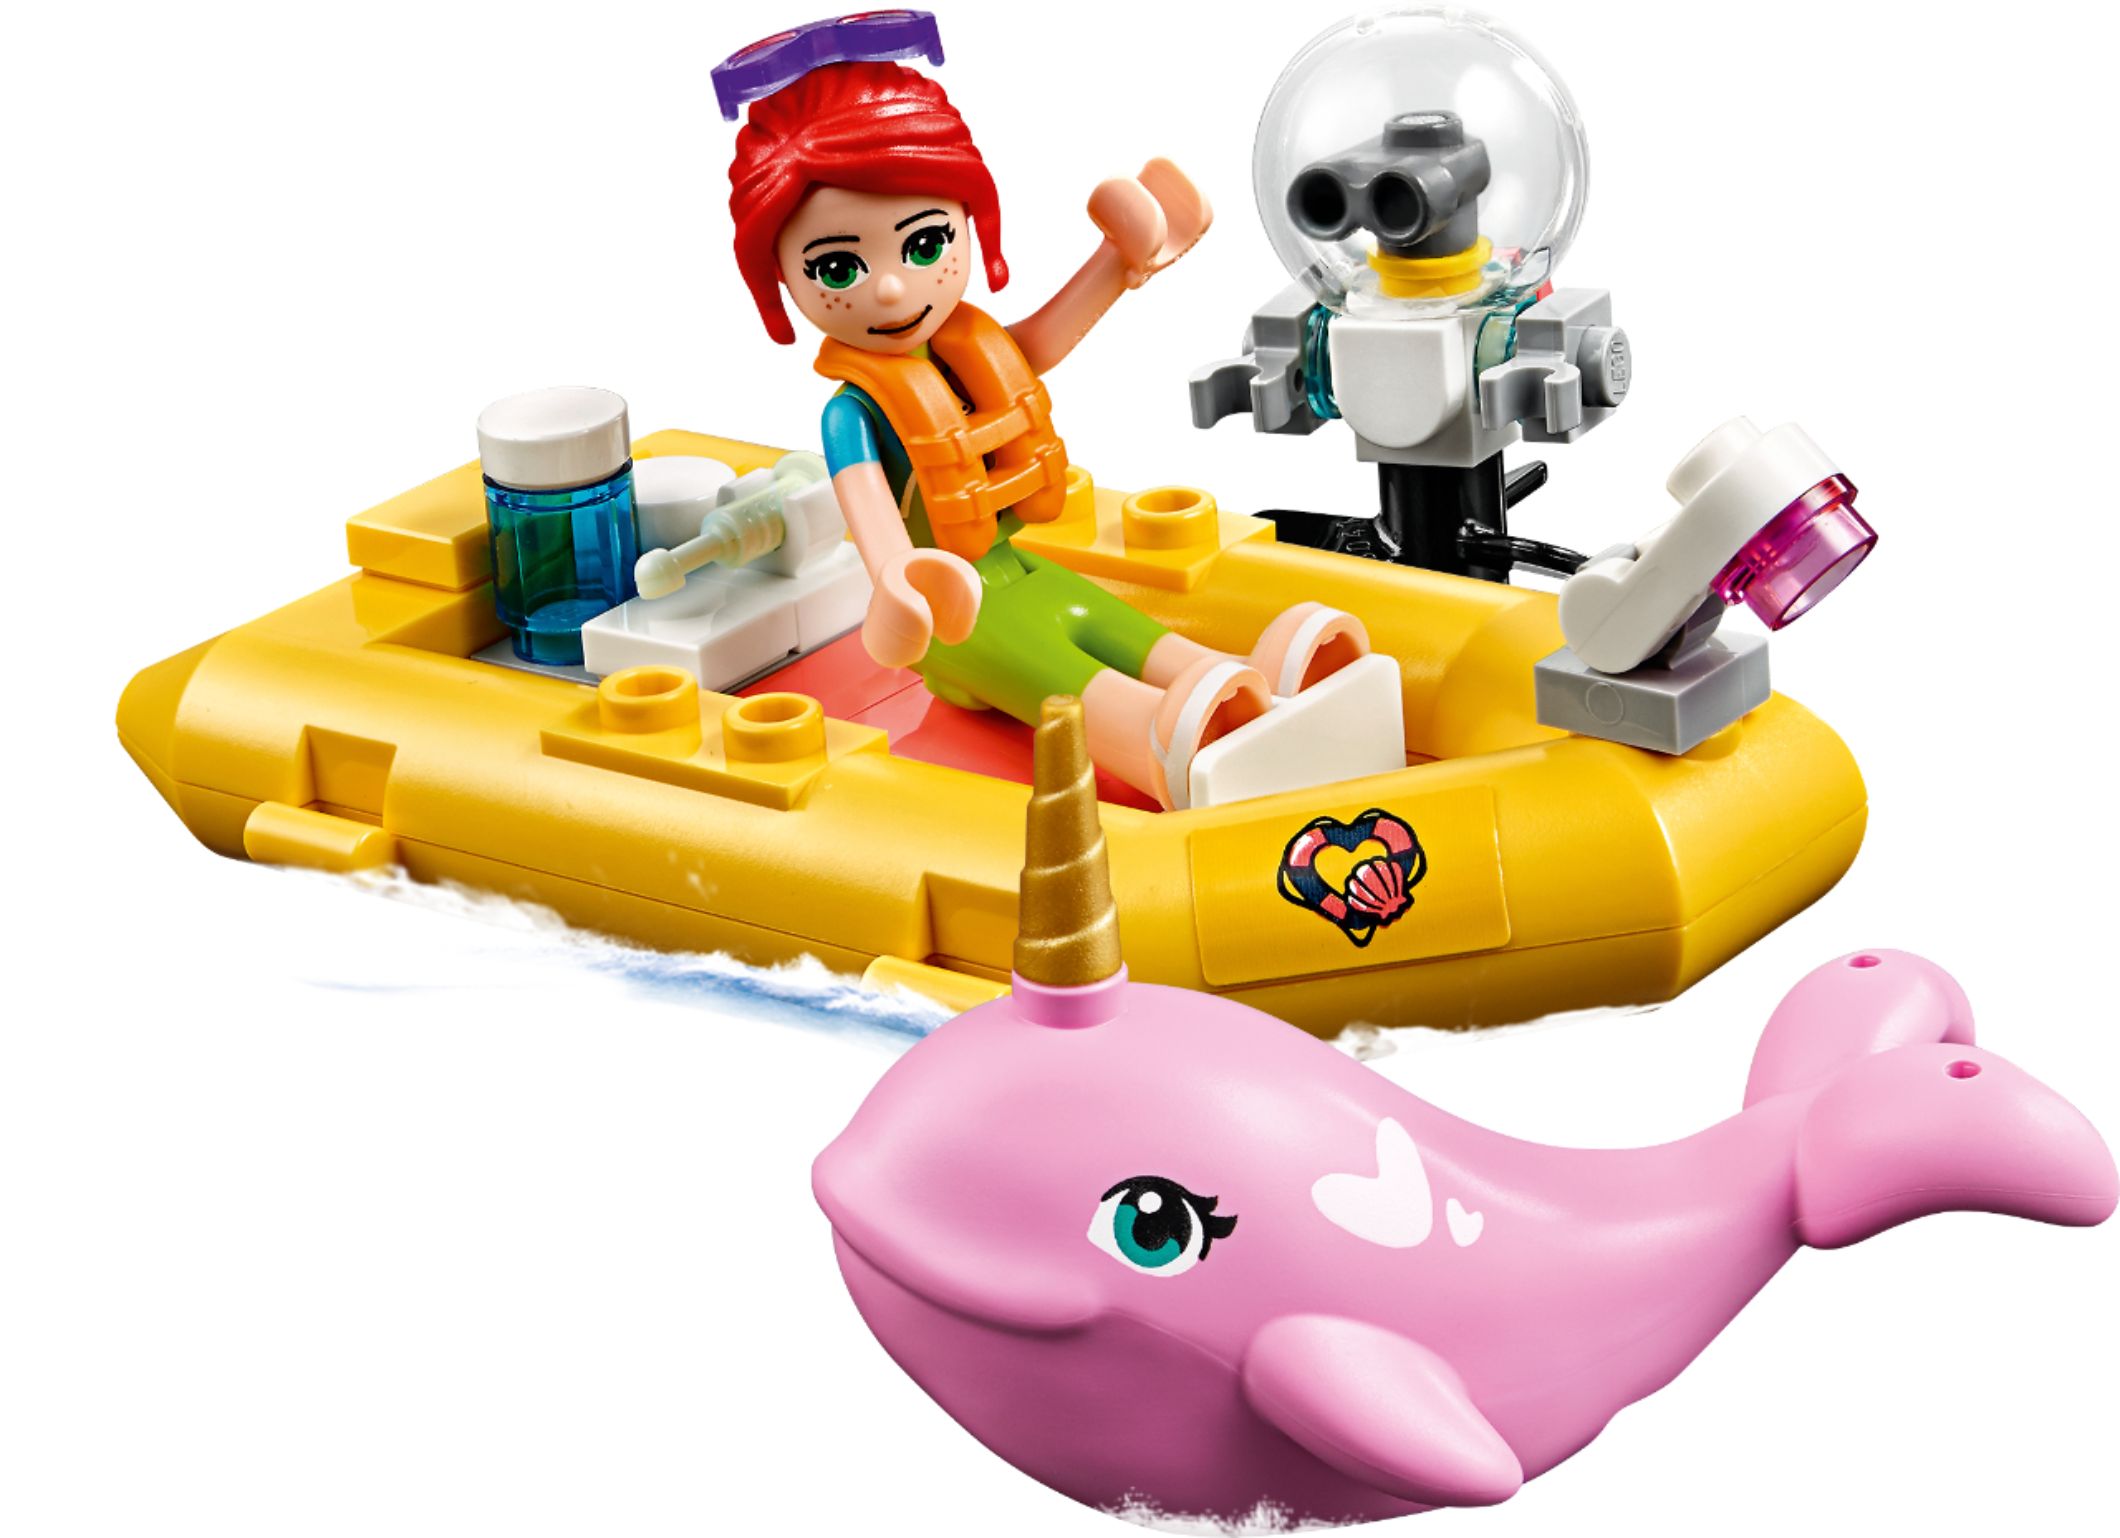 kim Hindre legering Best Buy: LEGO Friends Rescue Mission Boat 41381 6251666